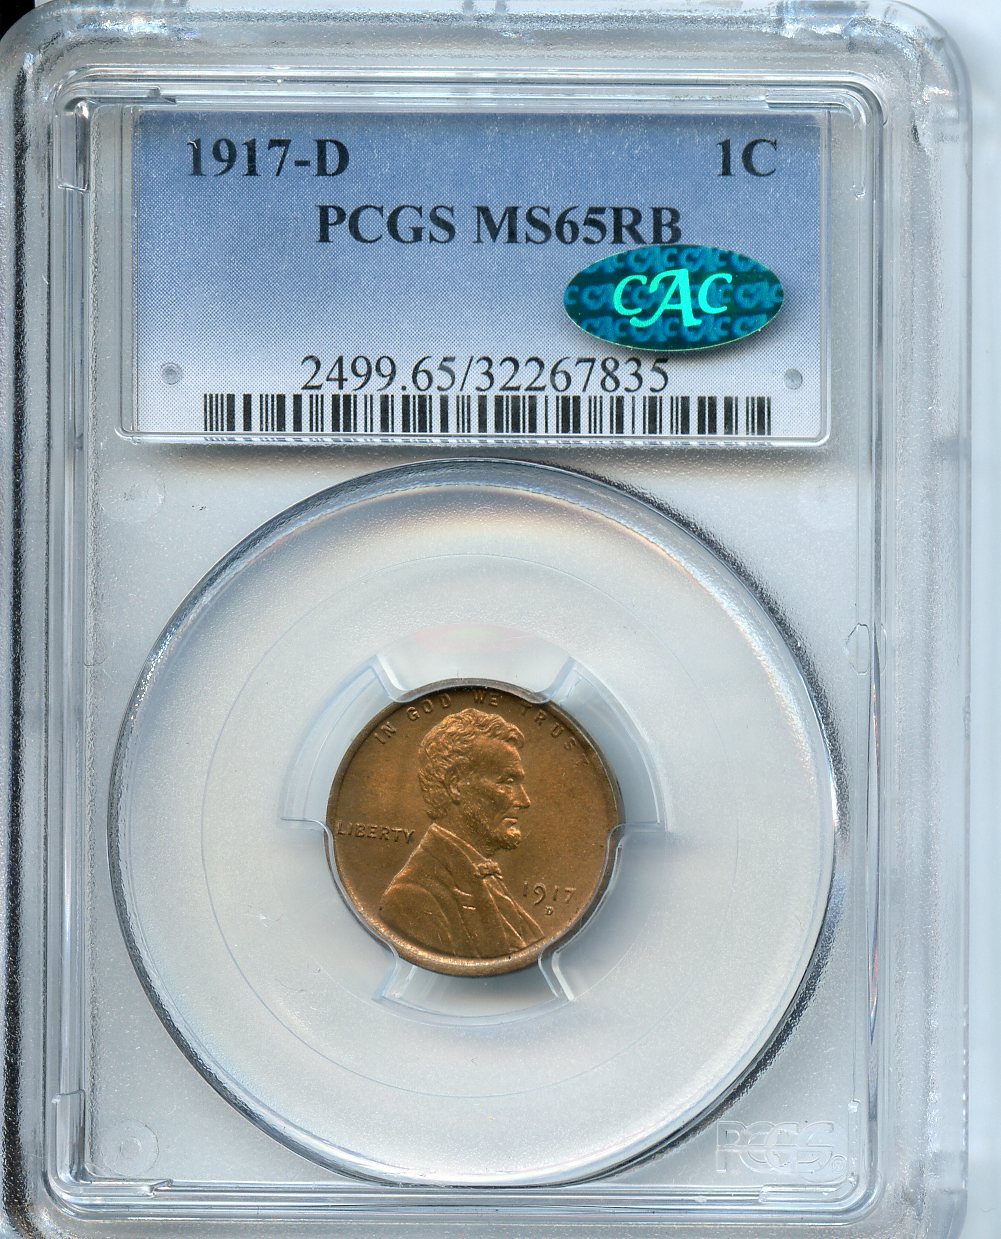 1917 D 1C  PCGS MS65RB  CAC   Lincoln Cent